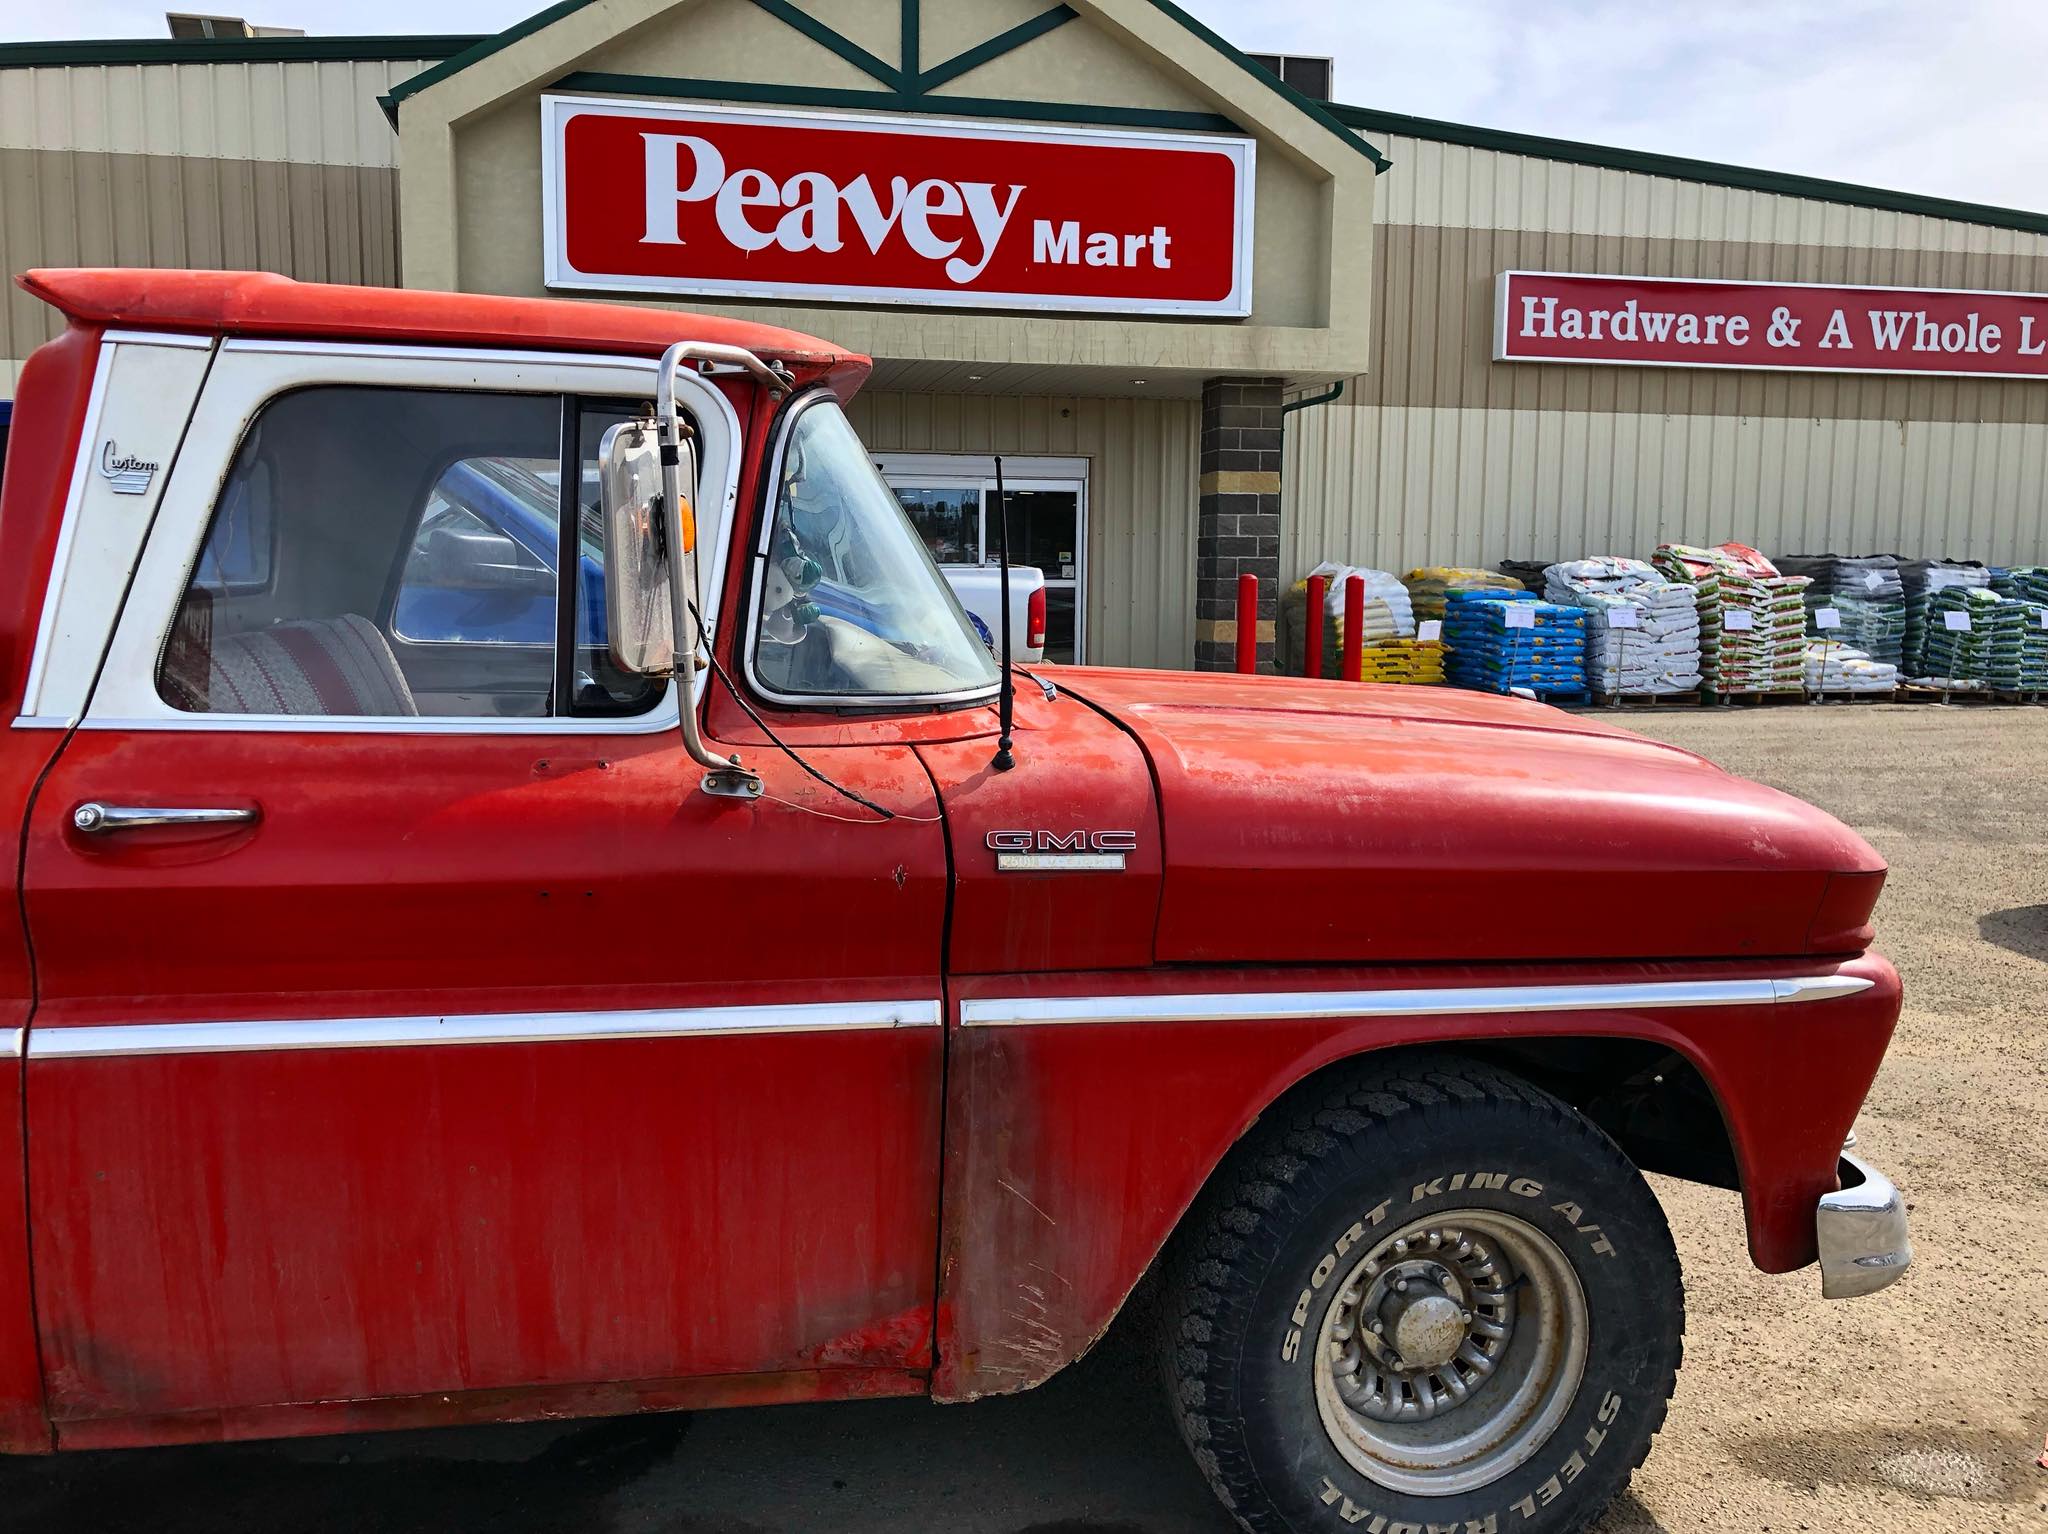 Ontario TSC stores being rebranded as 'Peavey Marts